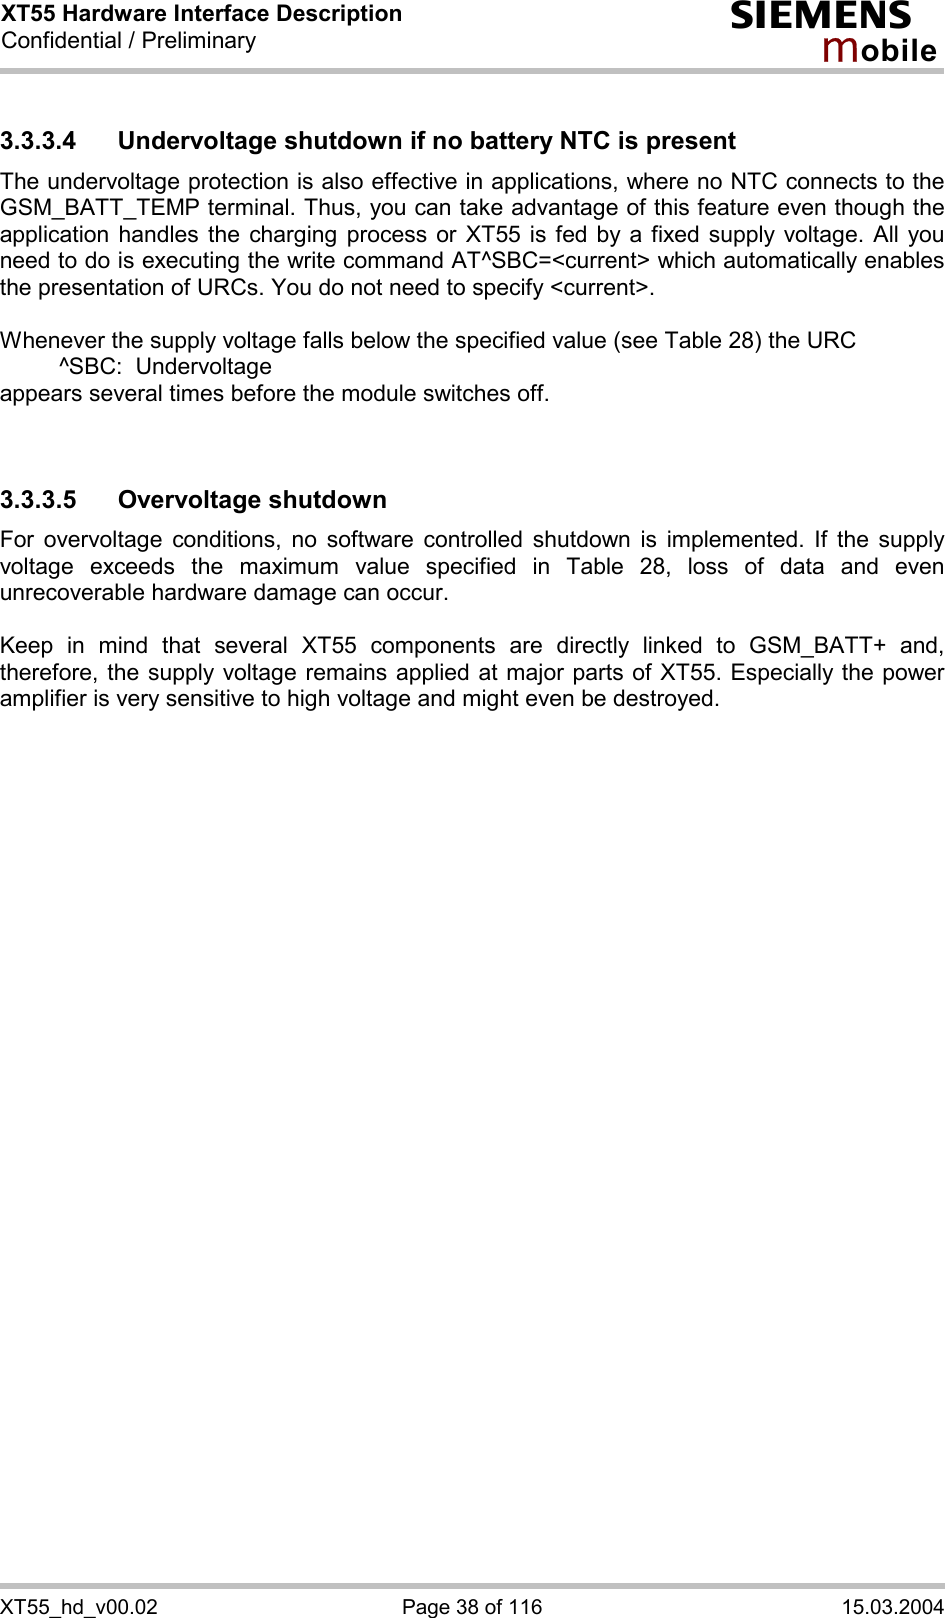 XT55 Hardware Interface Description Confidential / Preliminary s mo b i l e XT55_hd_v00.02  Page 38 of 116  15.03.2004 3.3.3.4 Undervoltage shutdown if no battery NTC is present The undervoltage protection is also effective in applications, where no NTC connects to the GSM_BATT_TEMP terminal. Thus, you can take advantage of this feature even though the application handles the charging process or XT55 is fed by a fixed supply voltage. All you need to do is executing the write command AT^SBC=&lt;current&gt; which automatically enables the presentation of URCs. You do not need to specify &lt;current&gt;.   Whenever the supply voltage falls below the specified value (see Table 28) the URC    ^SBC:  Undervoltage appears several times before the module switches off.   3.3.3.5 Overvoltage shutdown For overvoltage conditions, no software controlled shutdown is implemented. If the supply voltage exceeds the maximum value specified in Table 28, loss of data and even unrecoverable hardware damage can occur.   Keep in mind that several XT55 components are directly linked to GSM_BATT+ and, therefore, the supply voltage remains applied at major parts of XT55. Especially the power amplifier is very sensitive to high voltage and might even be destroyed.     